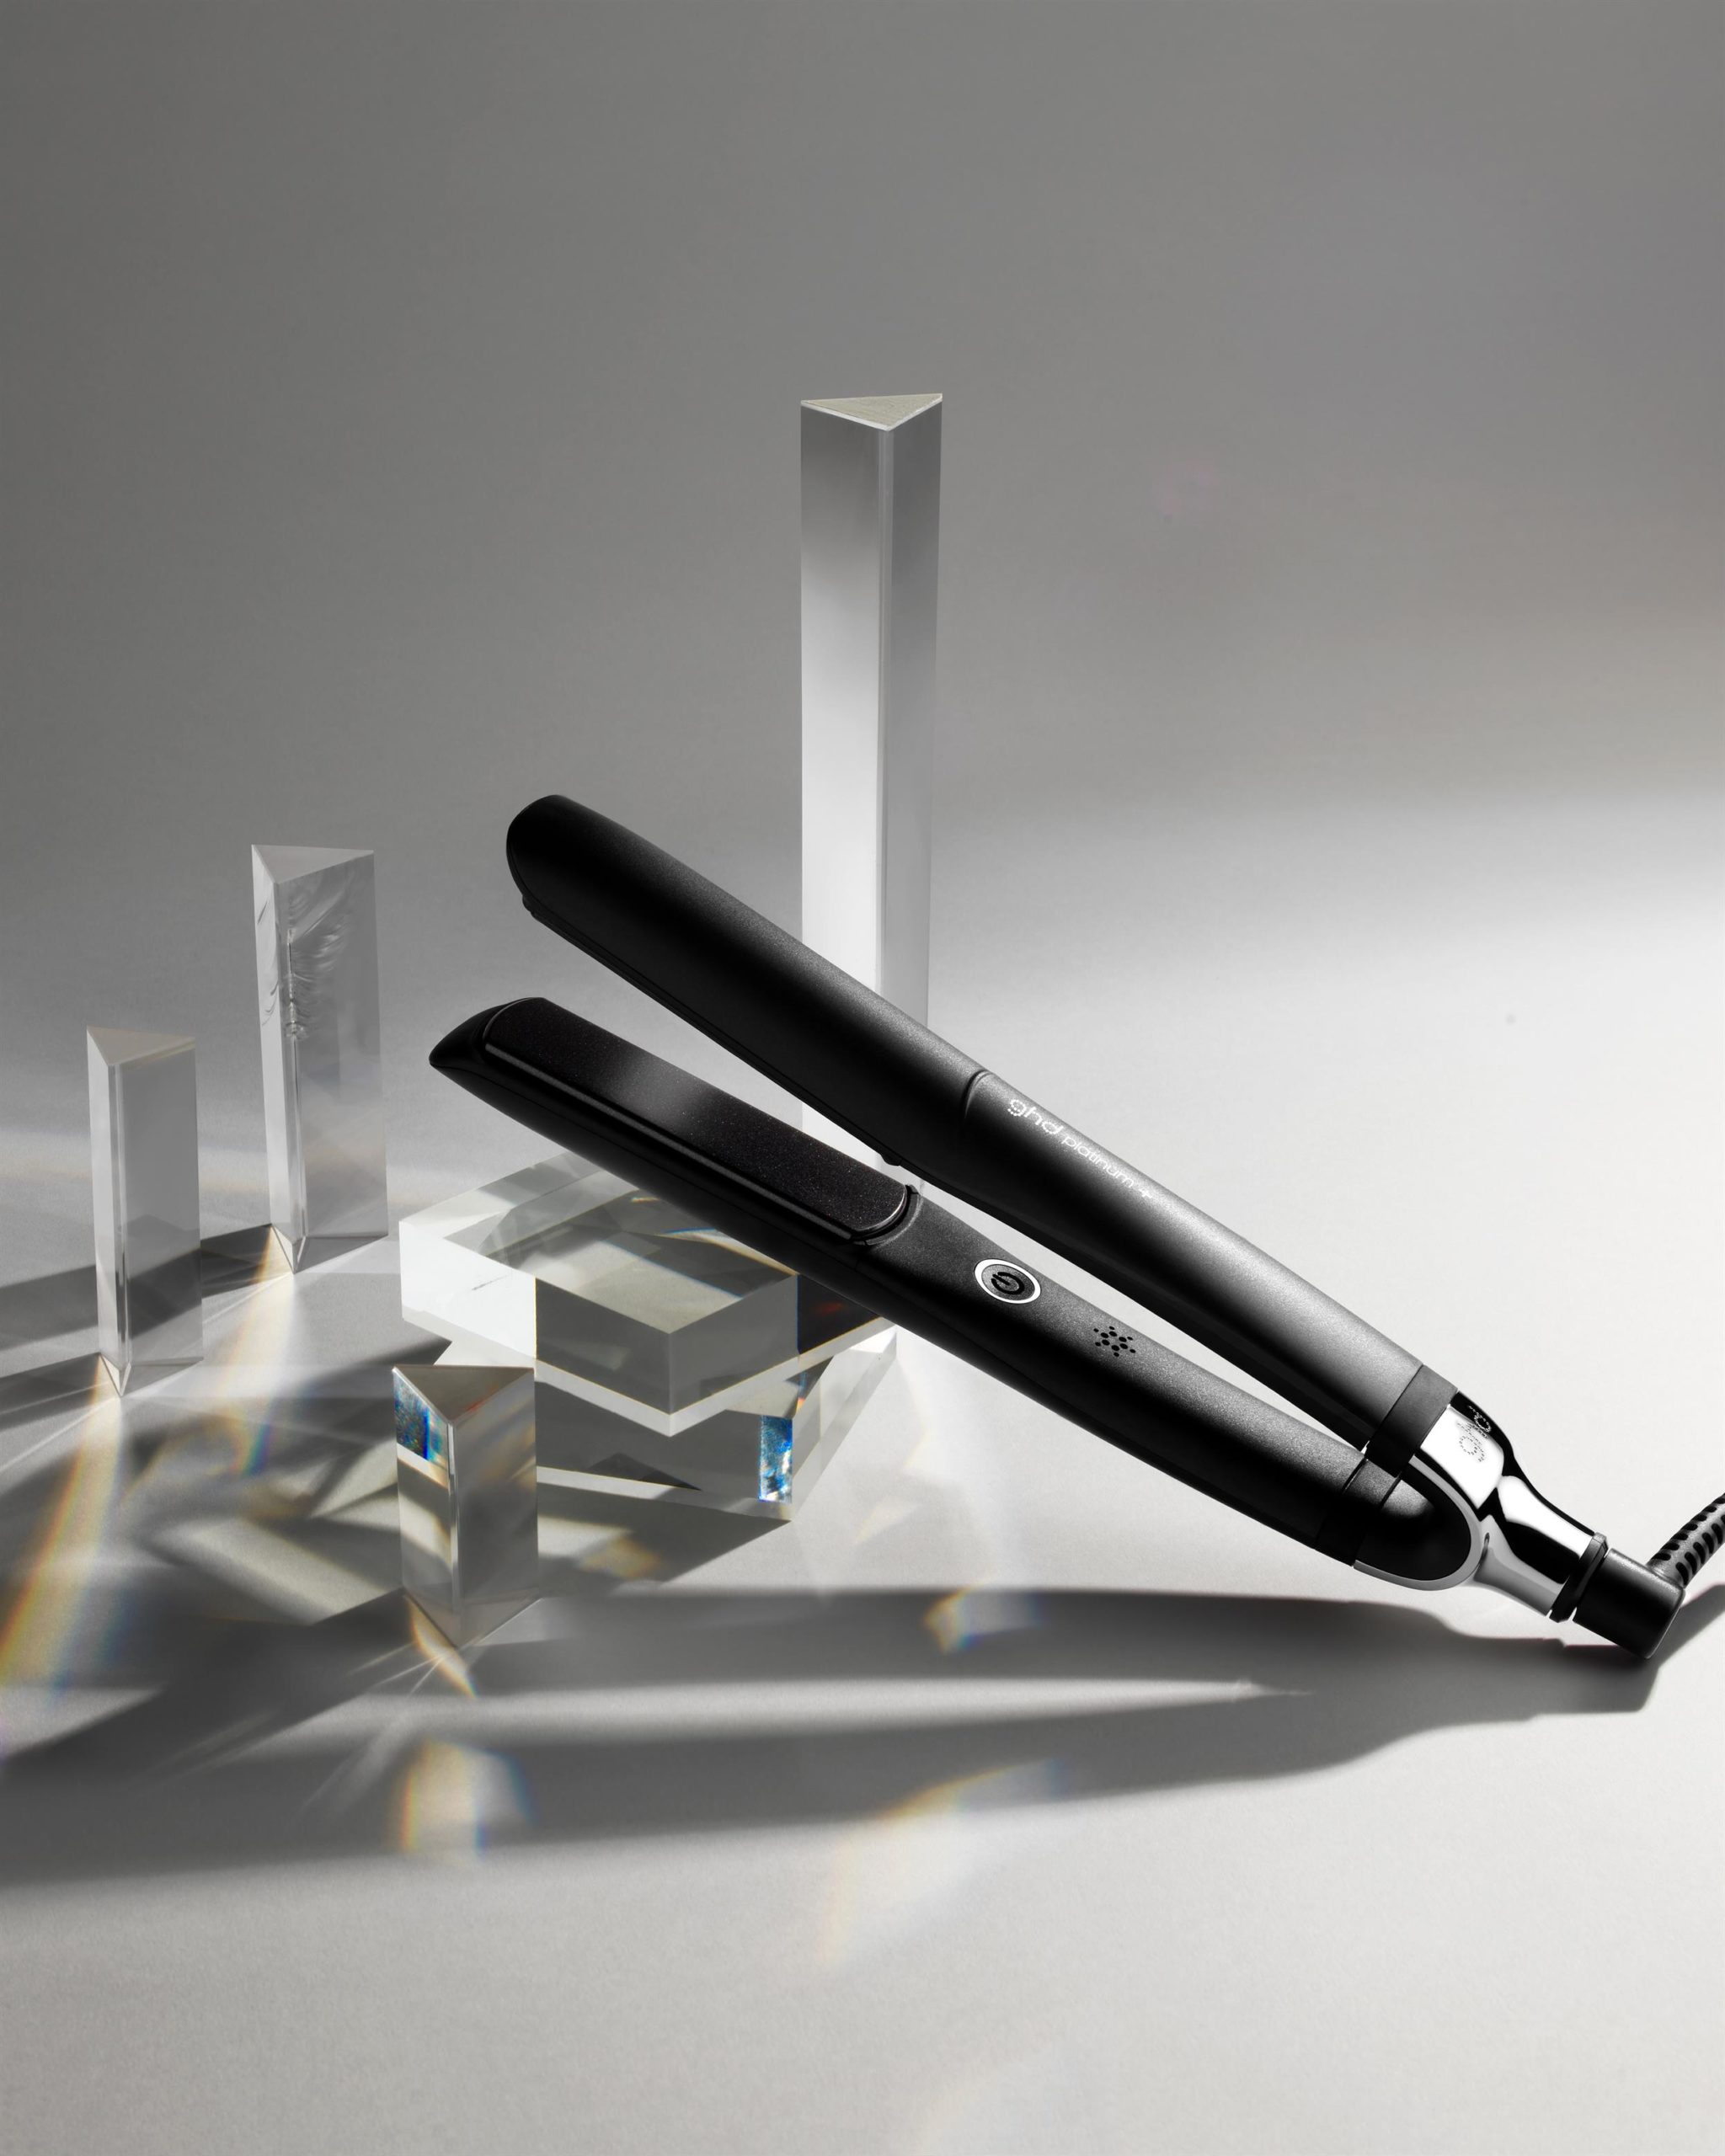 Discover the Magic of ghd Platinum Hair Straighteners